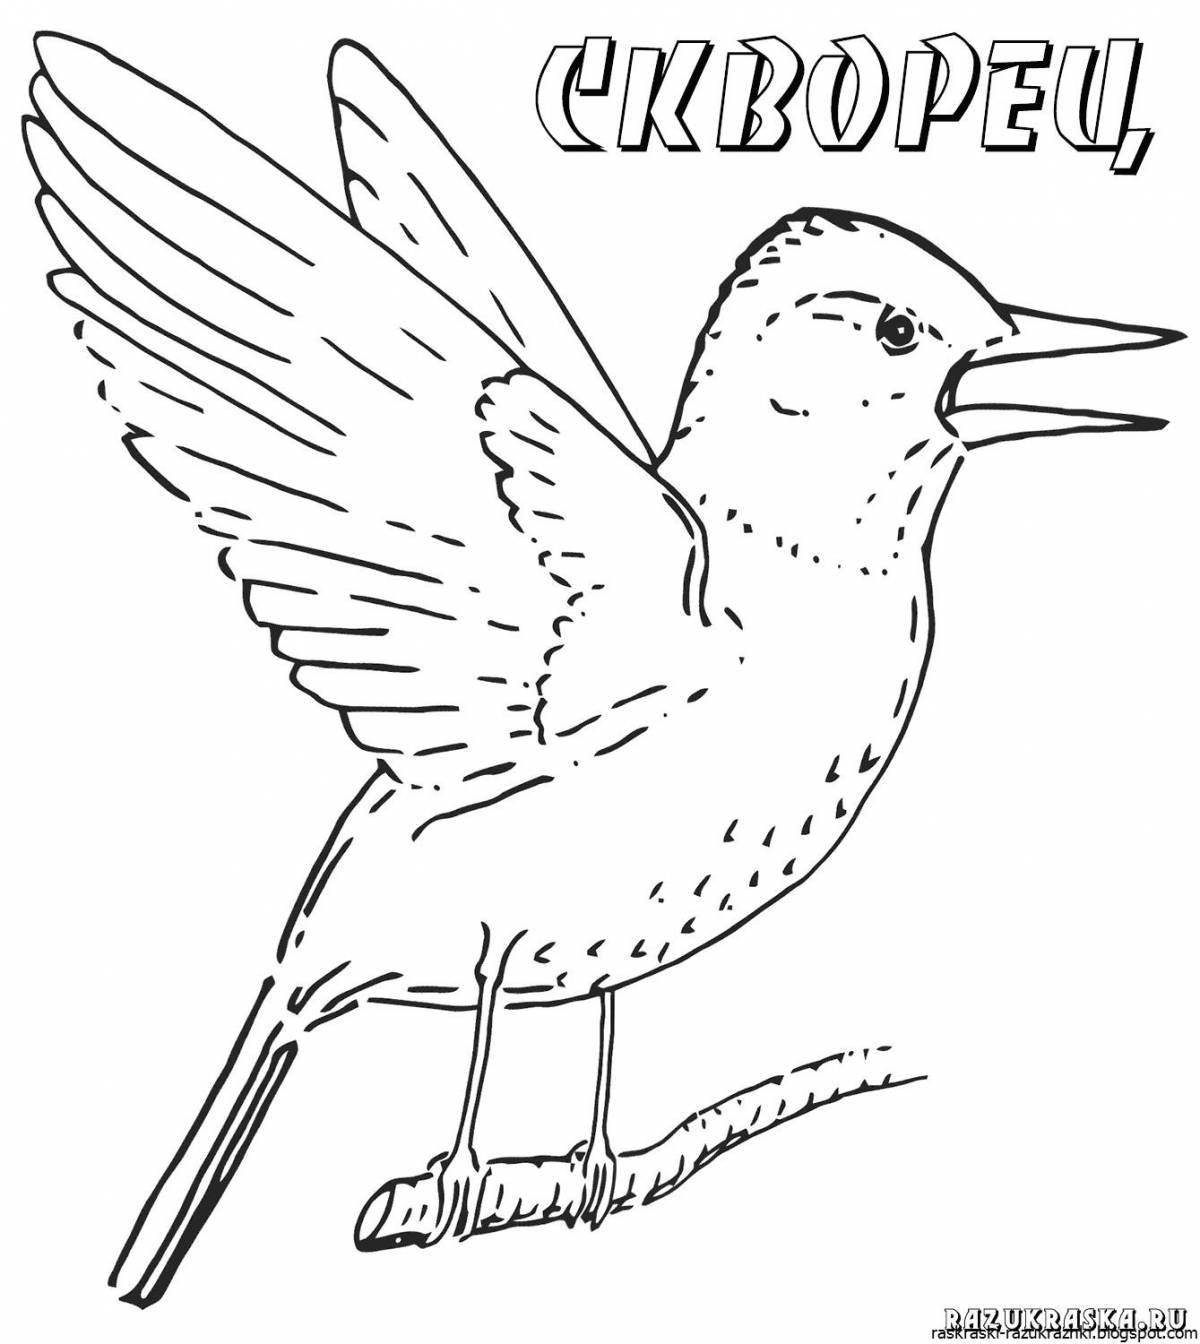 Amazing coloring pages of migratory birds for ages 5-6